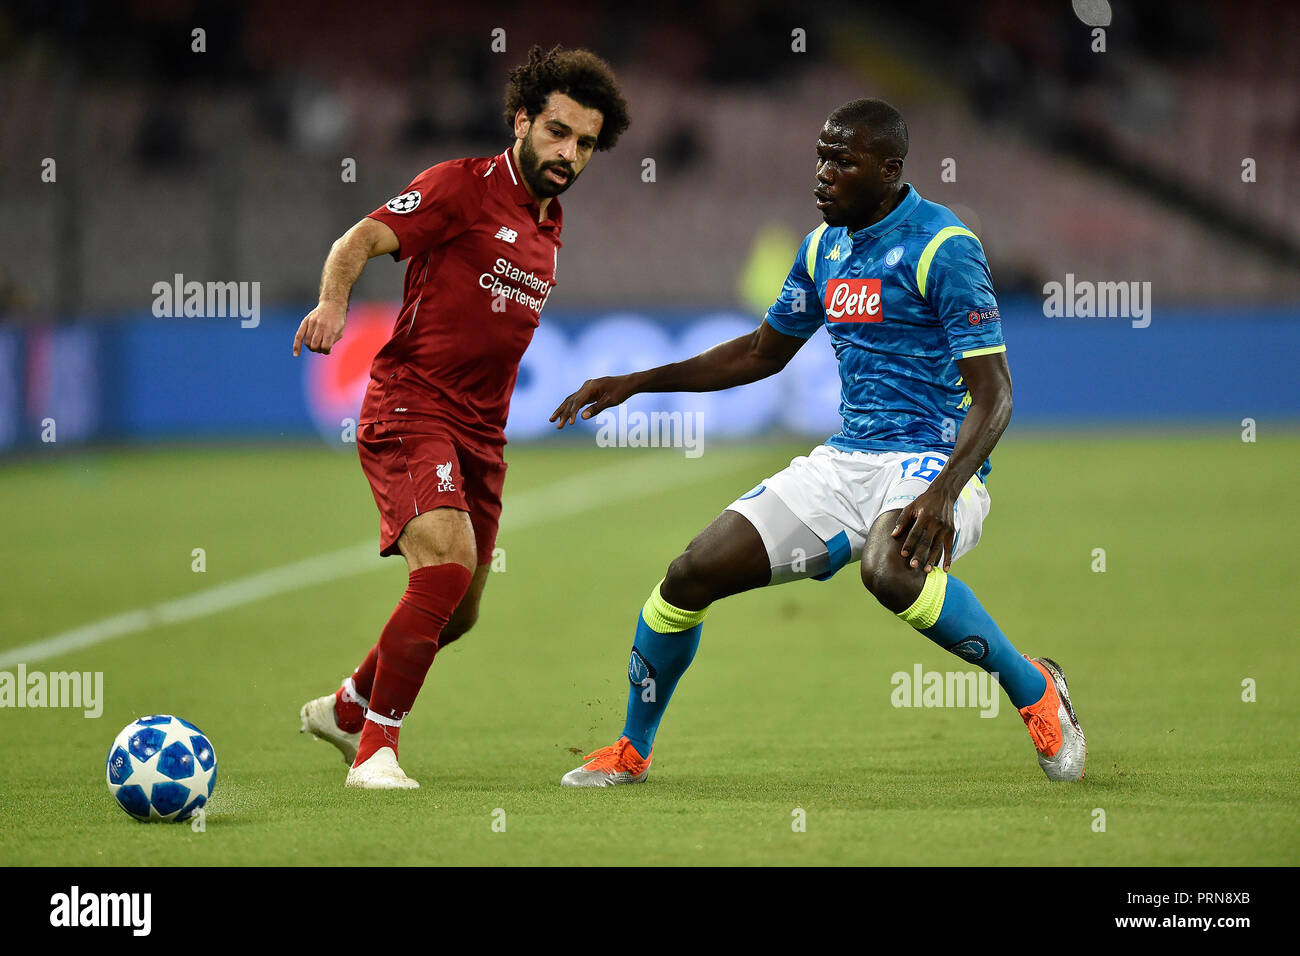 Naples, Italy. 3rd Oct 2018. Mohamed Salah of Liverpool is challenged by  Kalidou Koulibaly of Napoli during the UEFA Champions League group C match  between SSC Napoli and Liverpool FC at Stadio